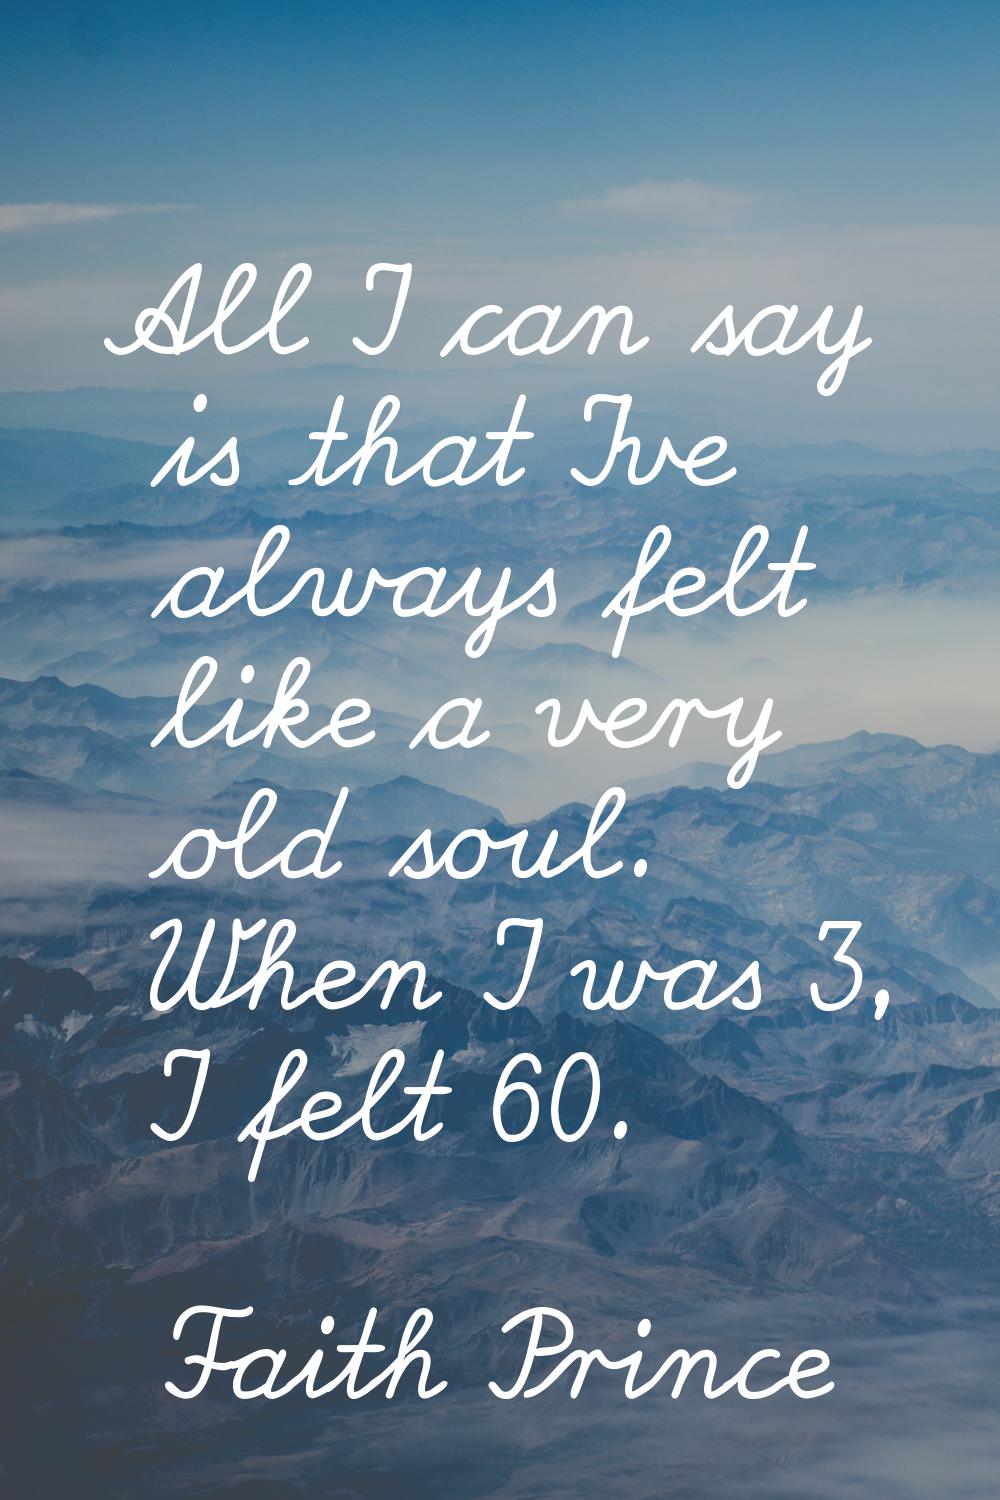 All I can say is that I've always felt like a very old soul. When I was 3, I felt 60.